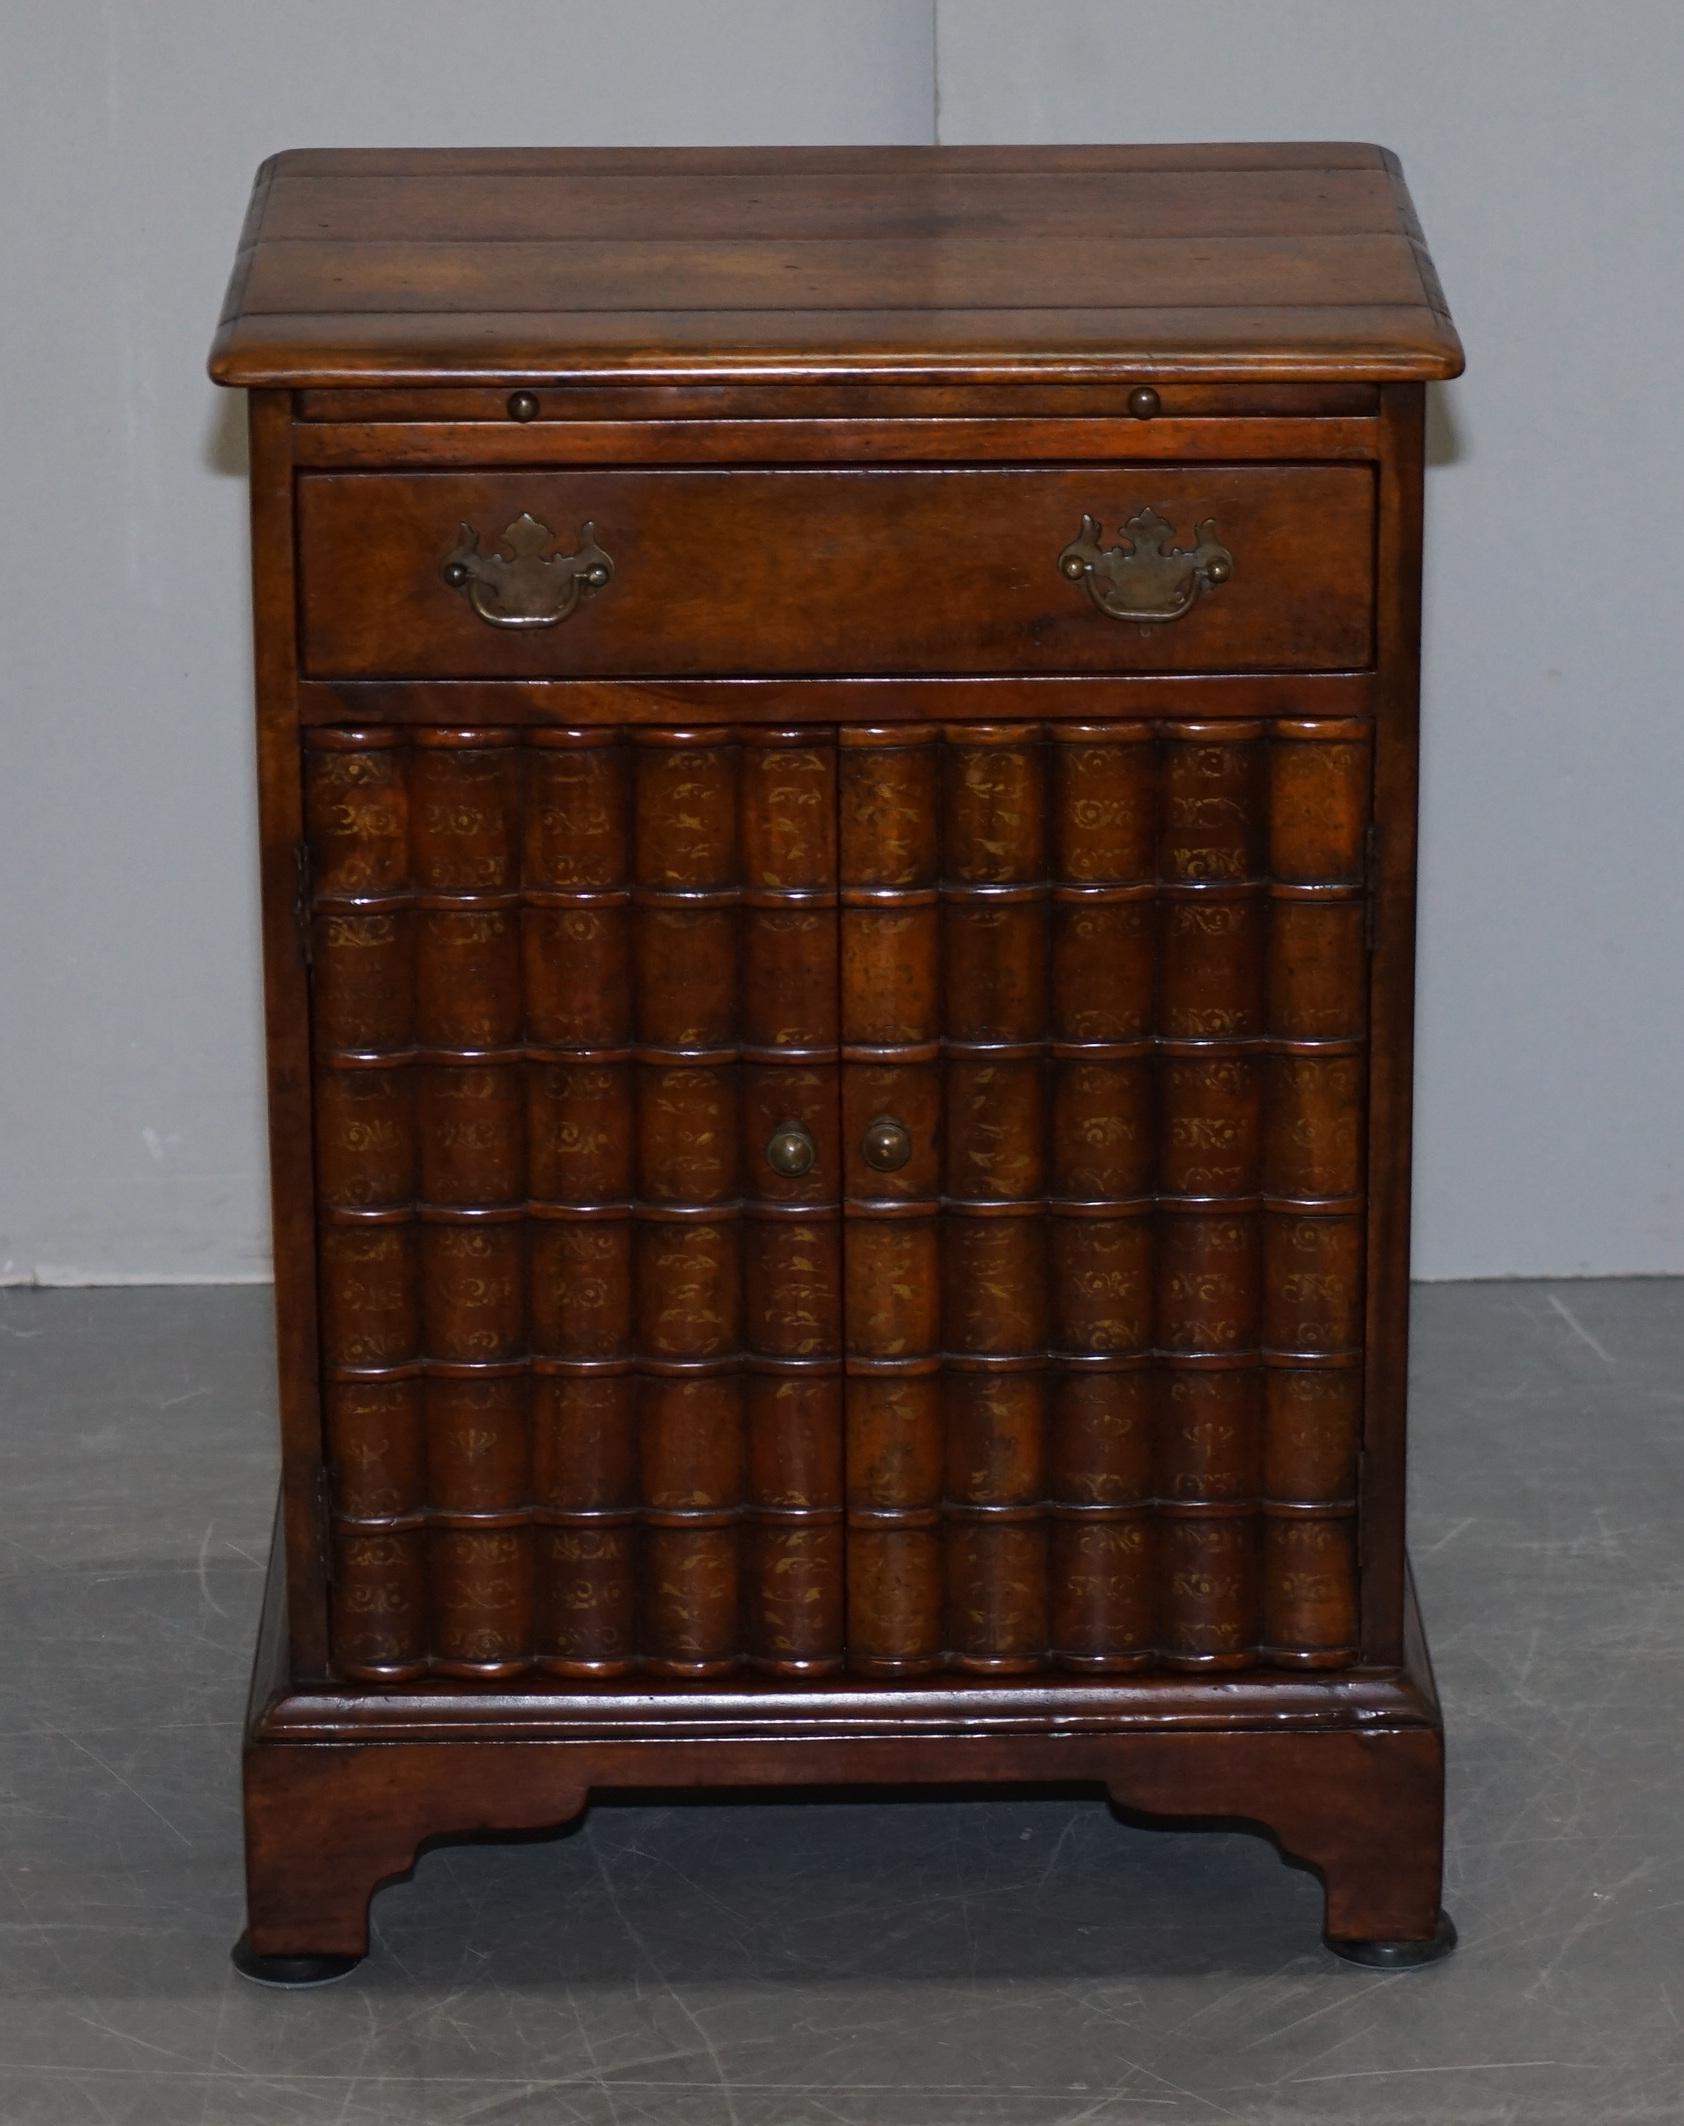 We are delighted to offer for sale this lovely Theodore Alexander faux book fronted side table with butlers serving tray

A very nicely made side table in solid hardwood, it has a faux book front which is reminiscent of the Regency piece and one